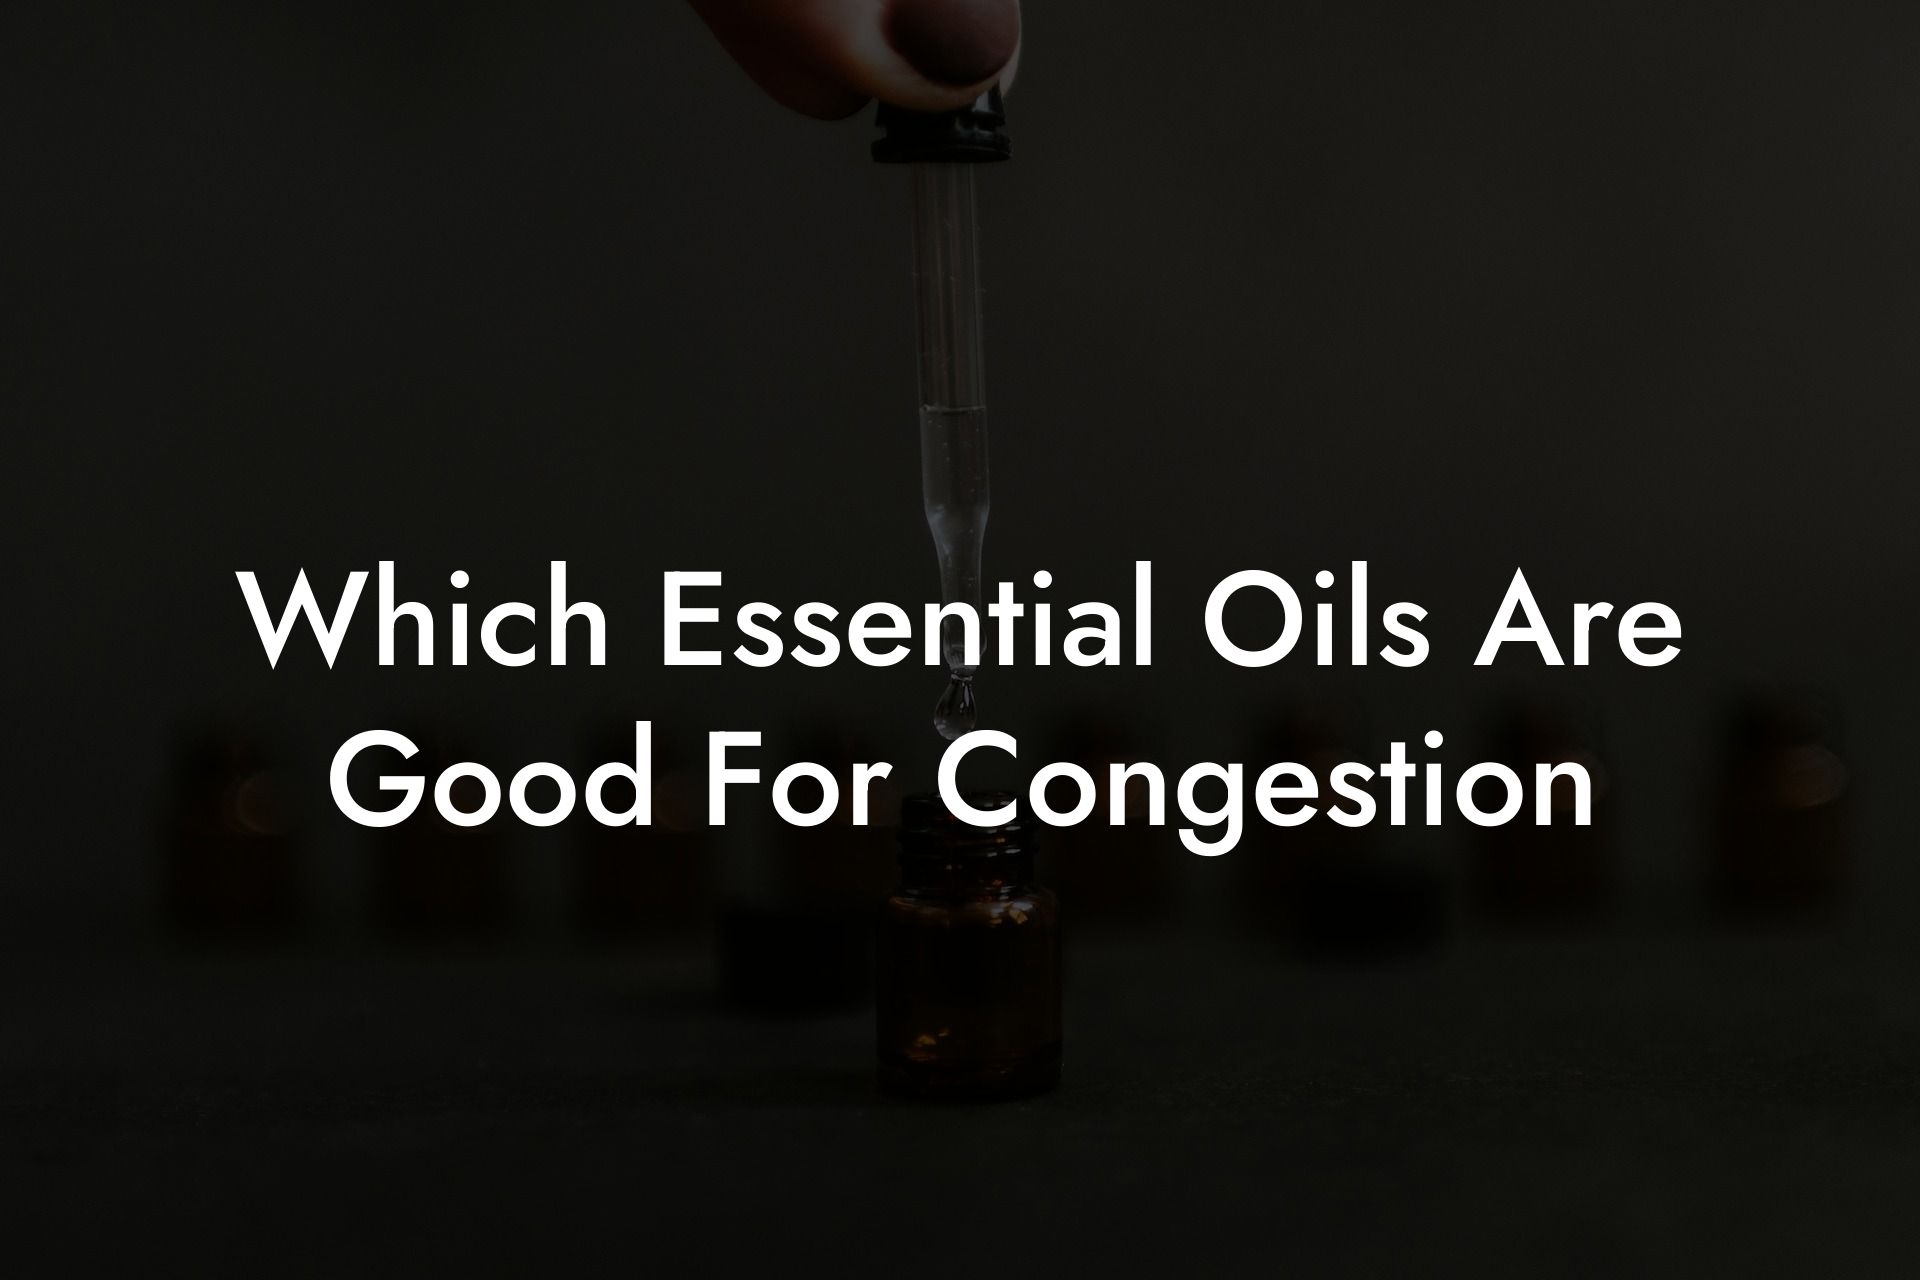 Which Essential Oils Are Good For Congestion